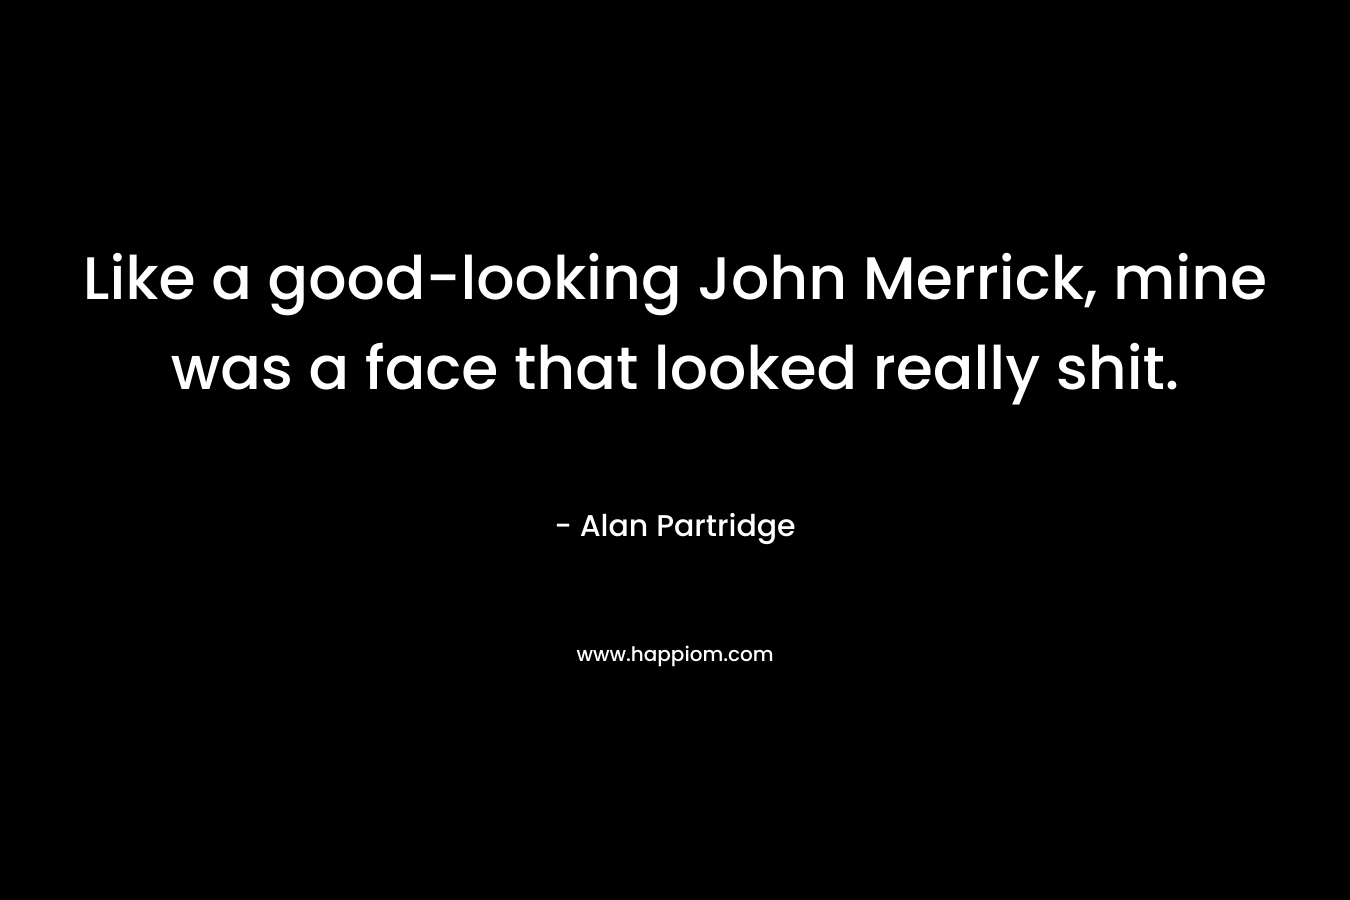 Like a good-looking John Merrick, mine was a face that looked really shit.